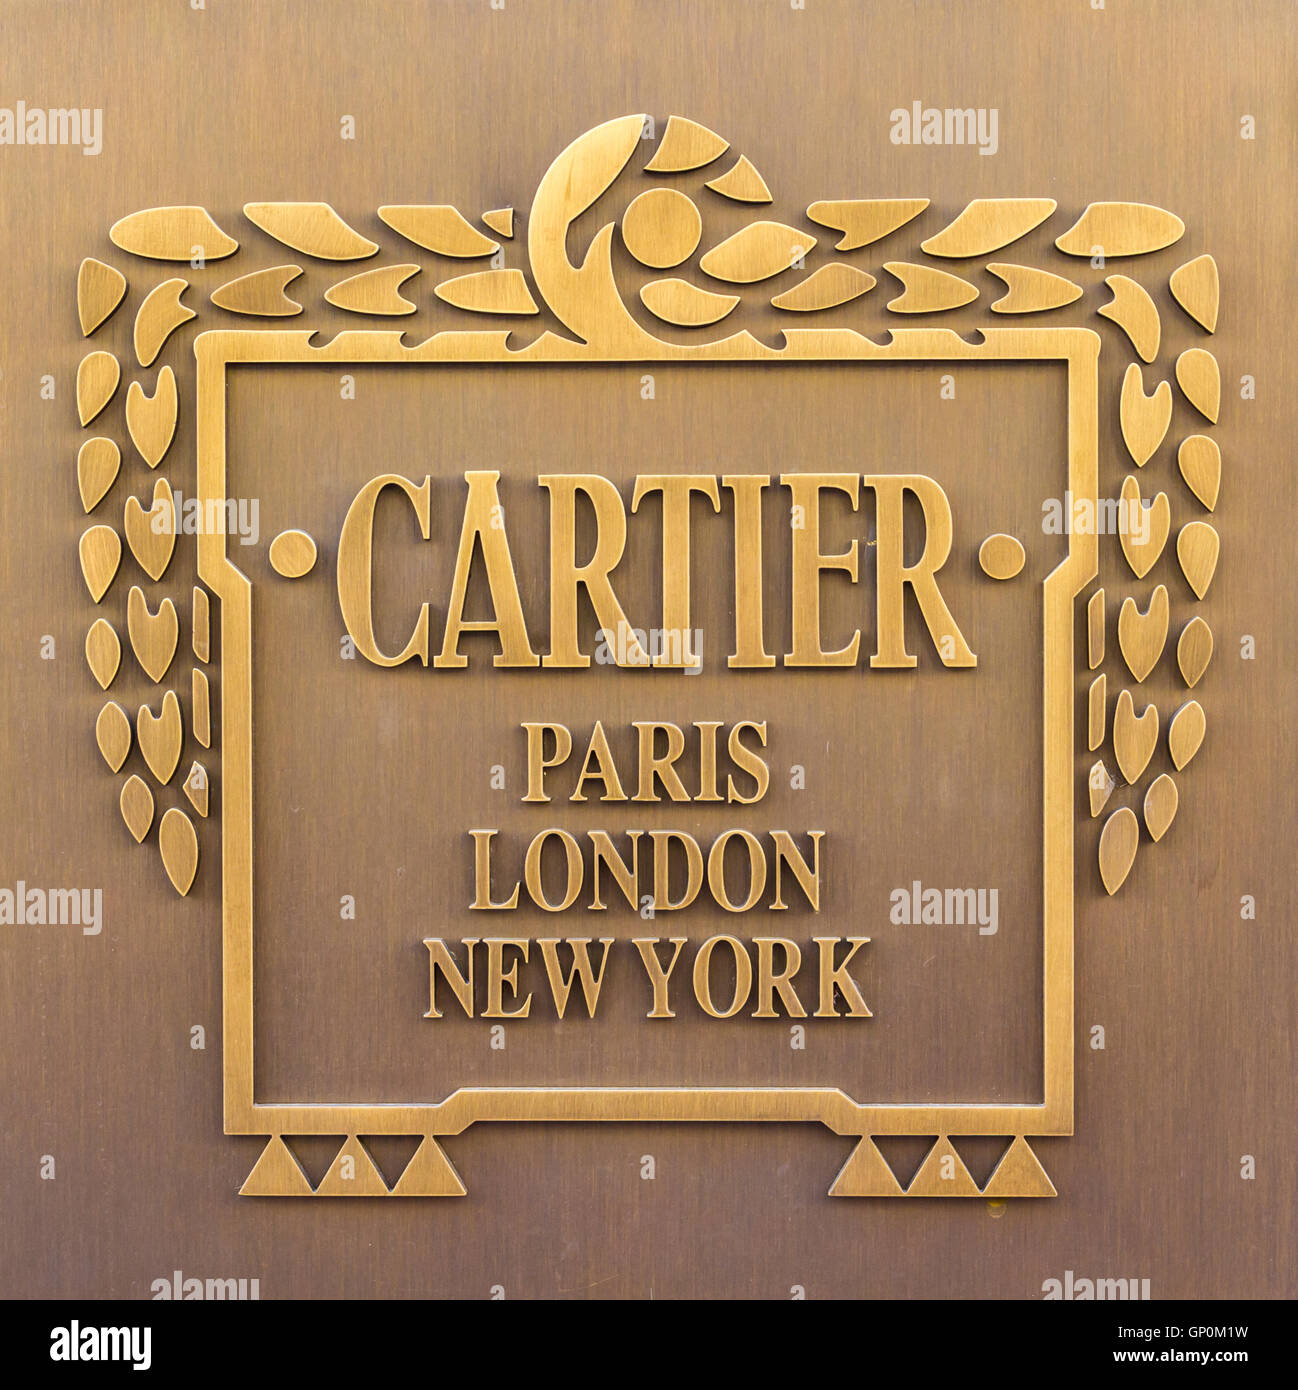 Cartier Gold Jewellery Banque d'image 